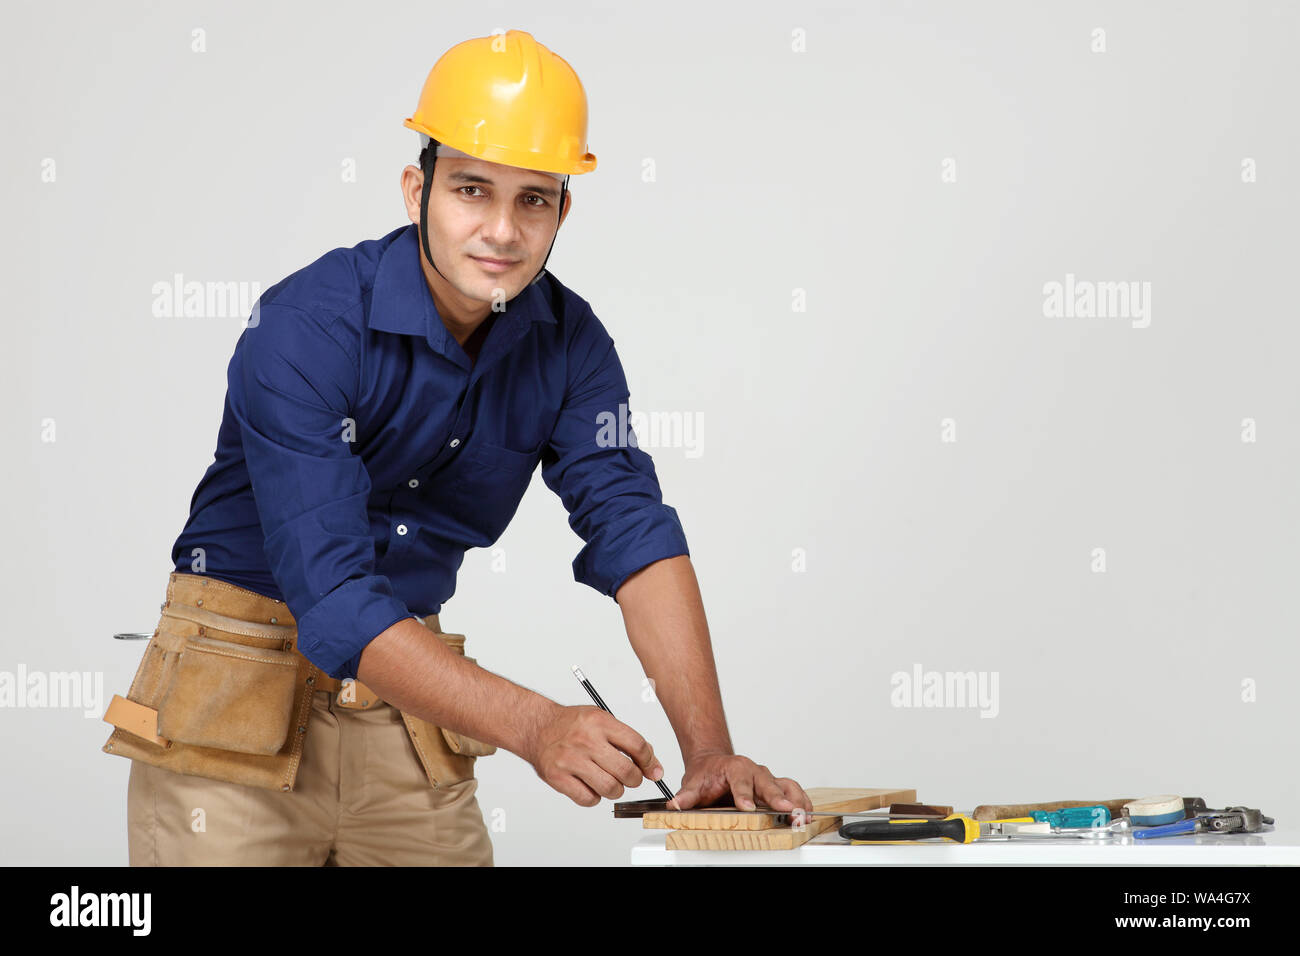 Carpenter measuring with ruler Stock Photo